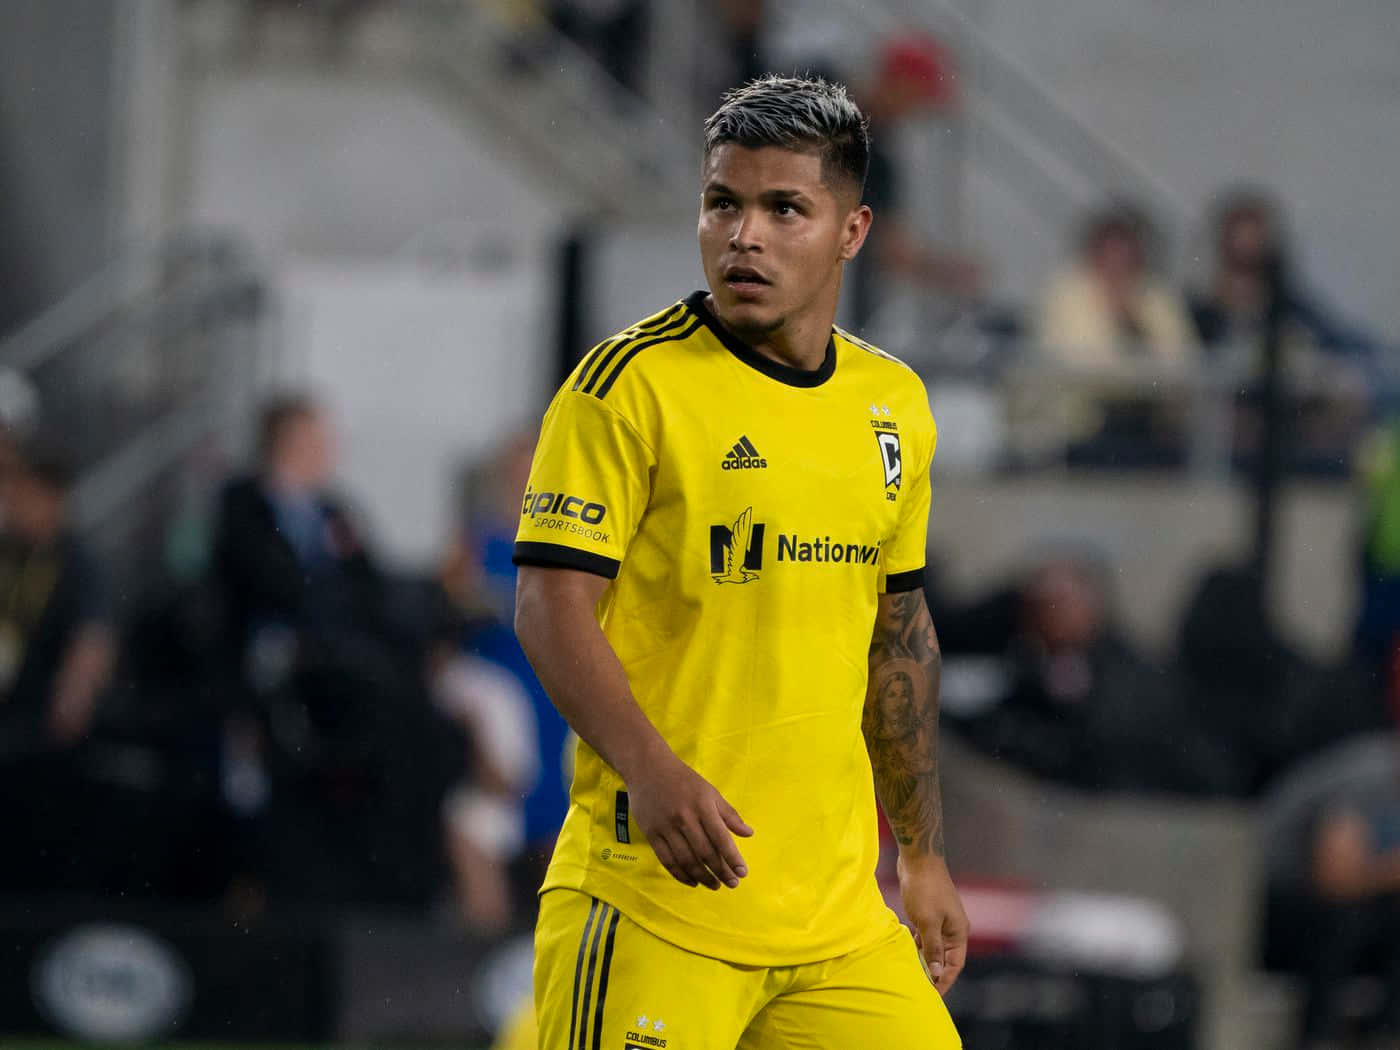 Cuchohernandez Columbus Crew Football Club Would Be Translated To 